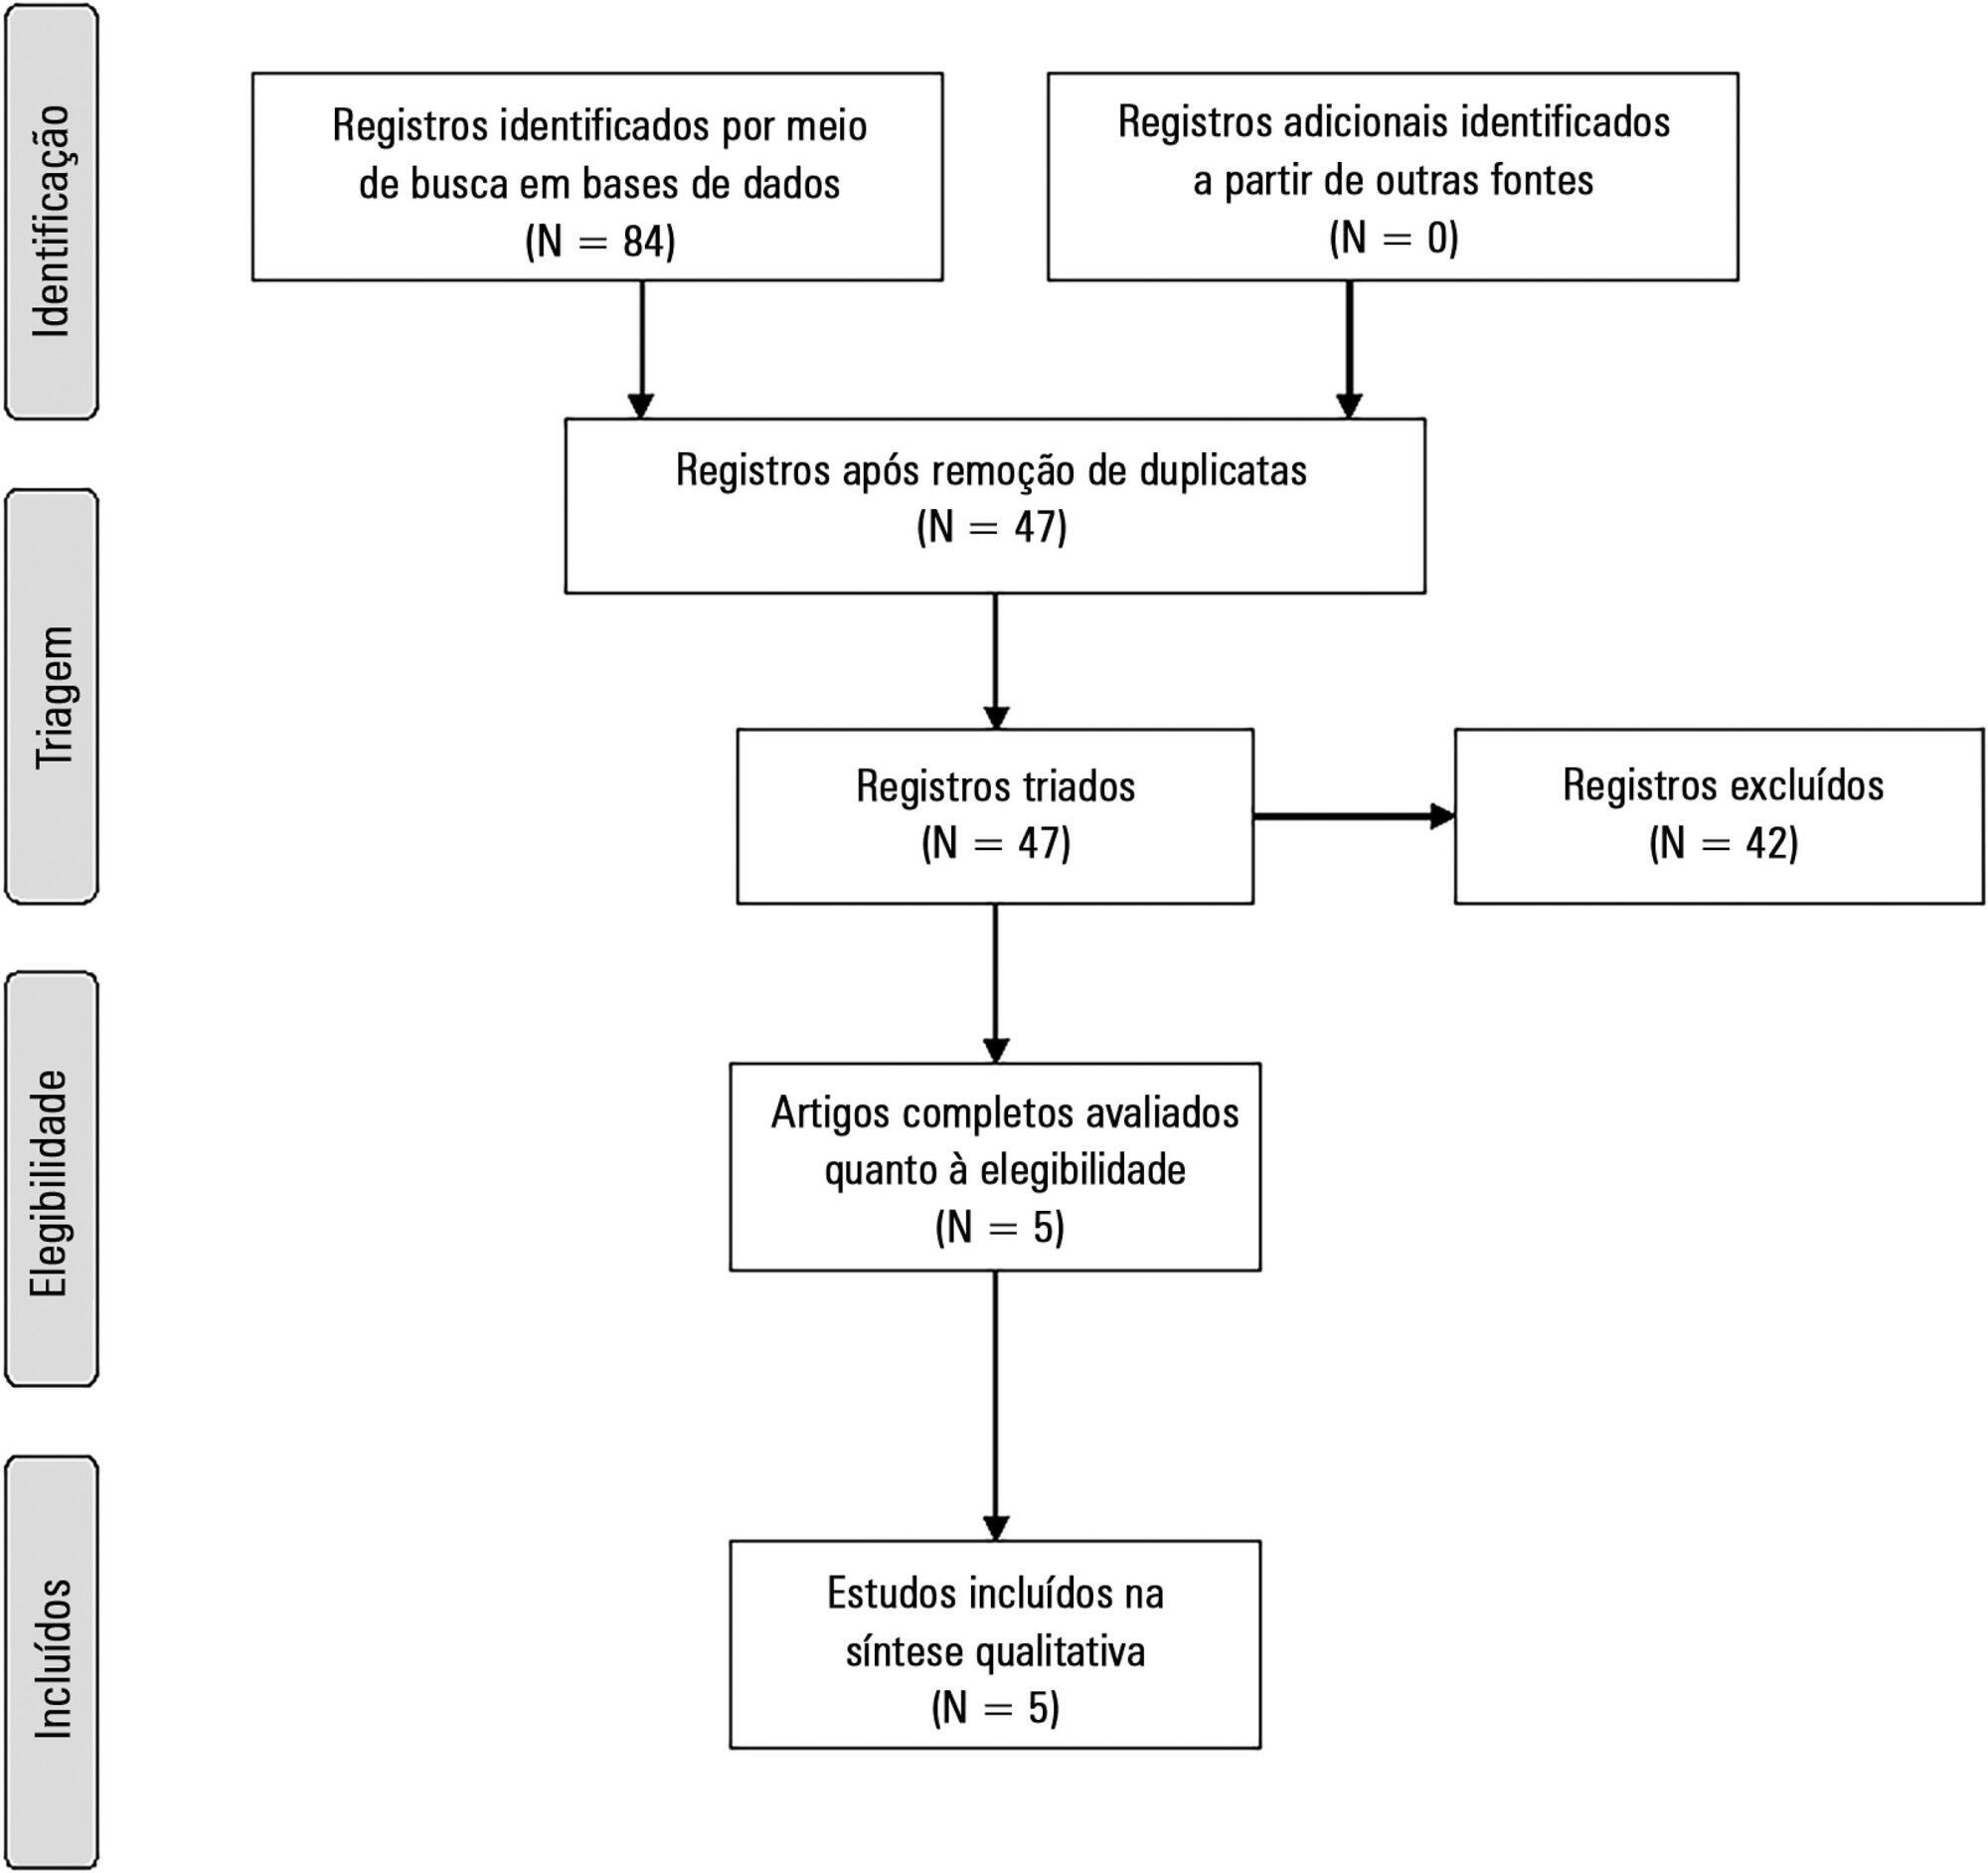 Applicability of respiratory variations in stroke volume and its surrogates for dynamic fluid responsiveness prediction in critically ill patients: a systematic review of the prevalence of required conditions